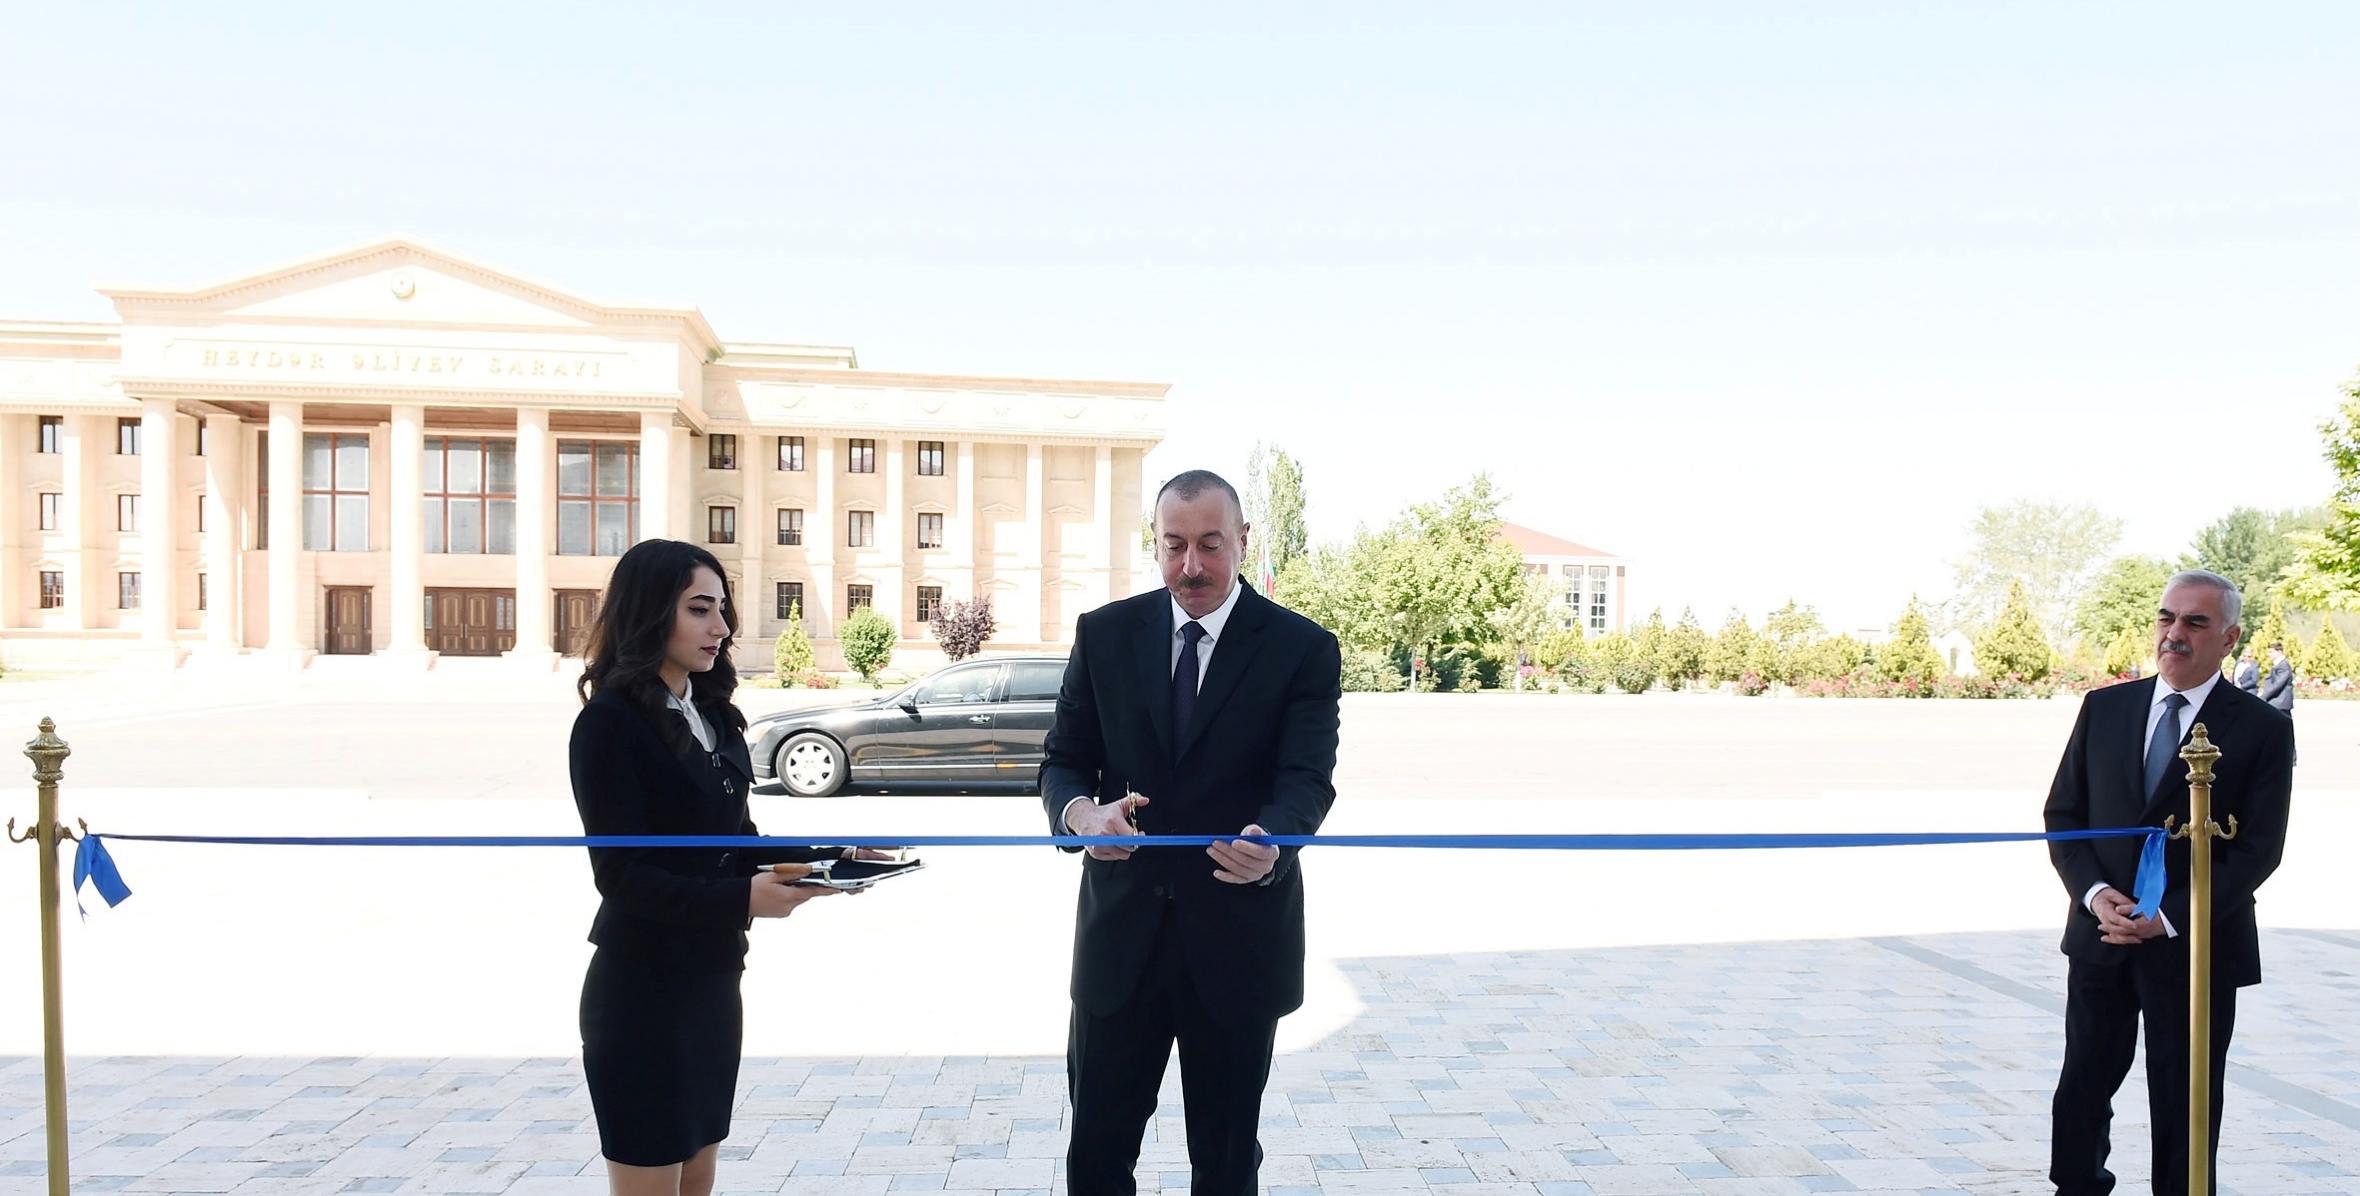 Ilham Aliyev has attended the opening of a new building of Nakhchivan Teachers Institute